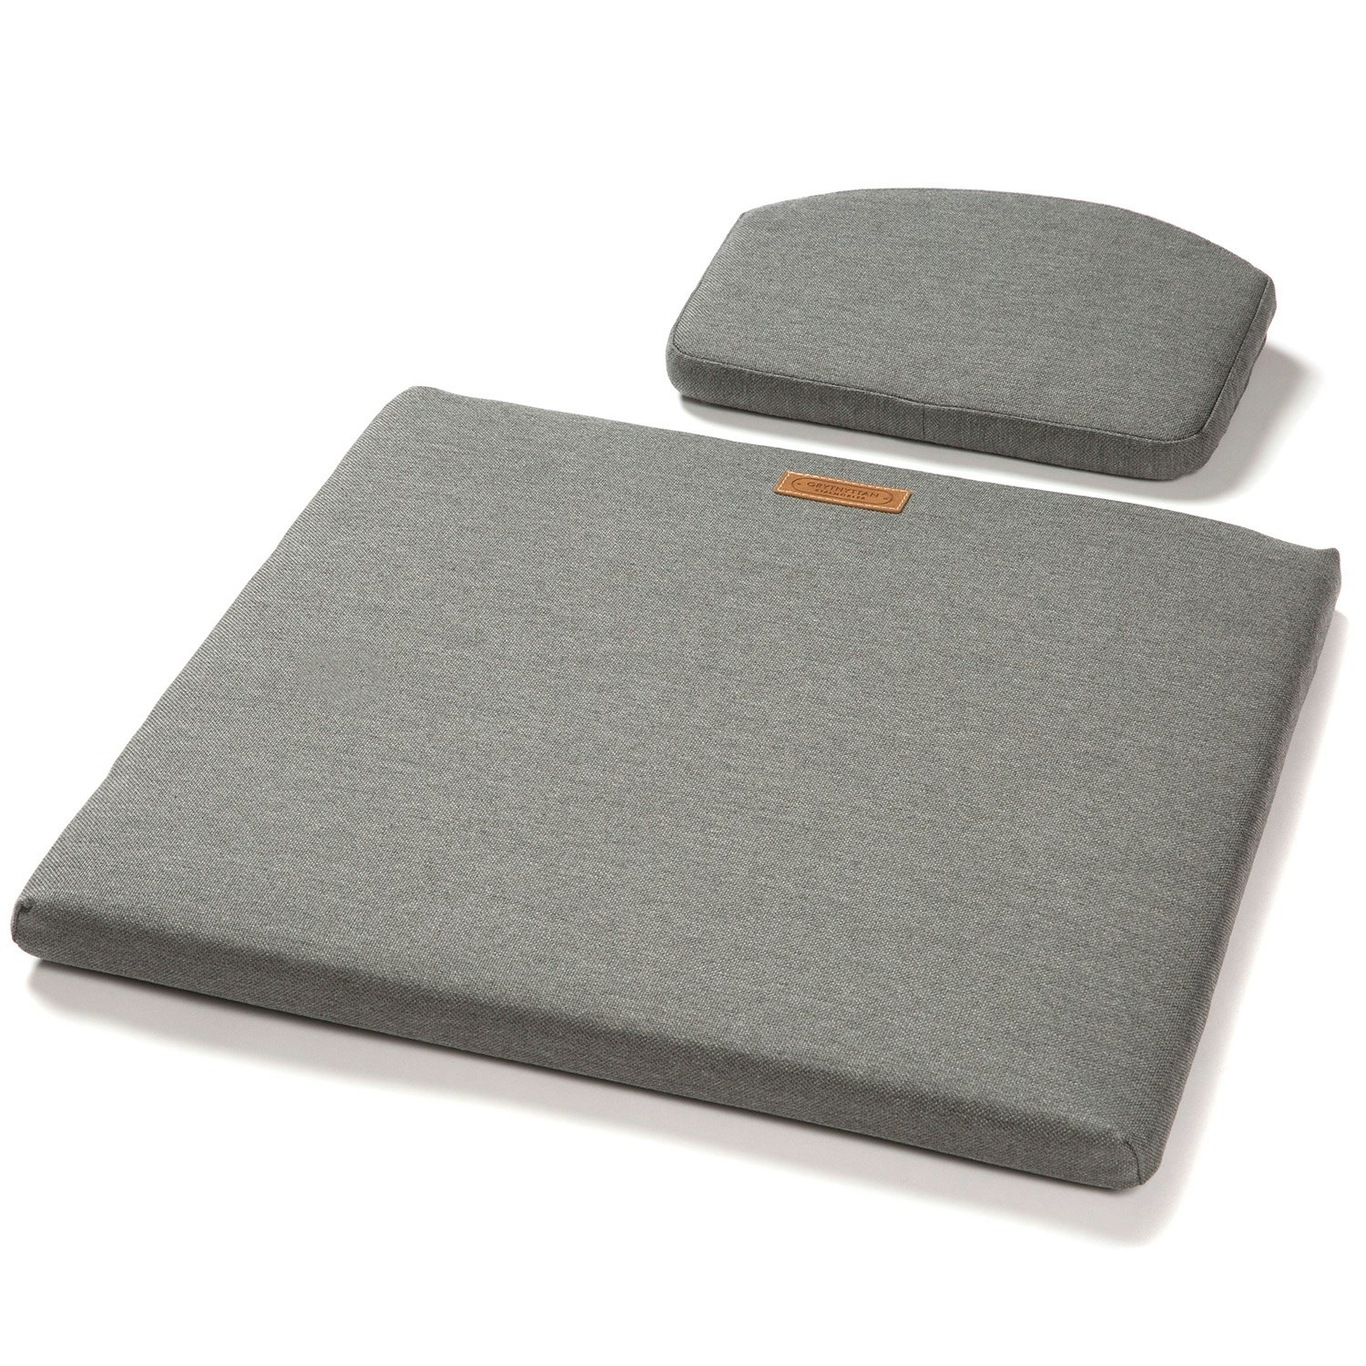 A3 Seat Cushion For Lounge Chair, Grey